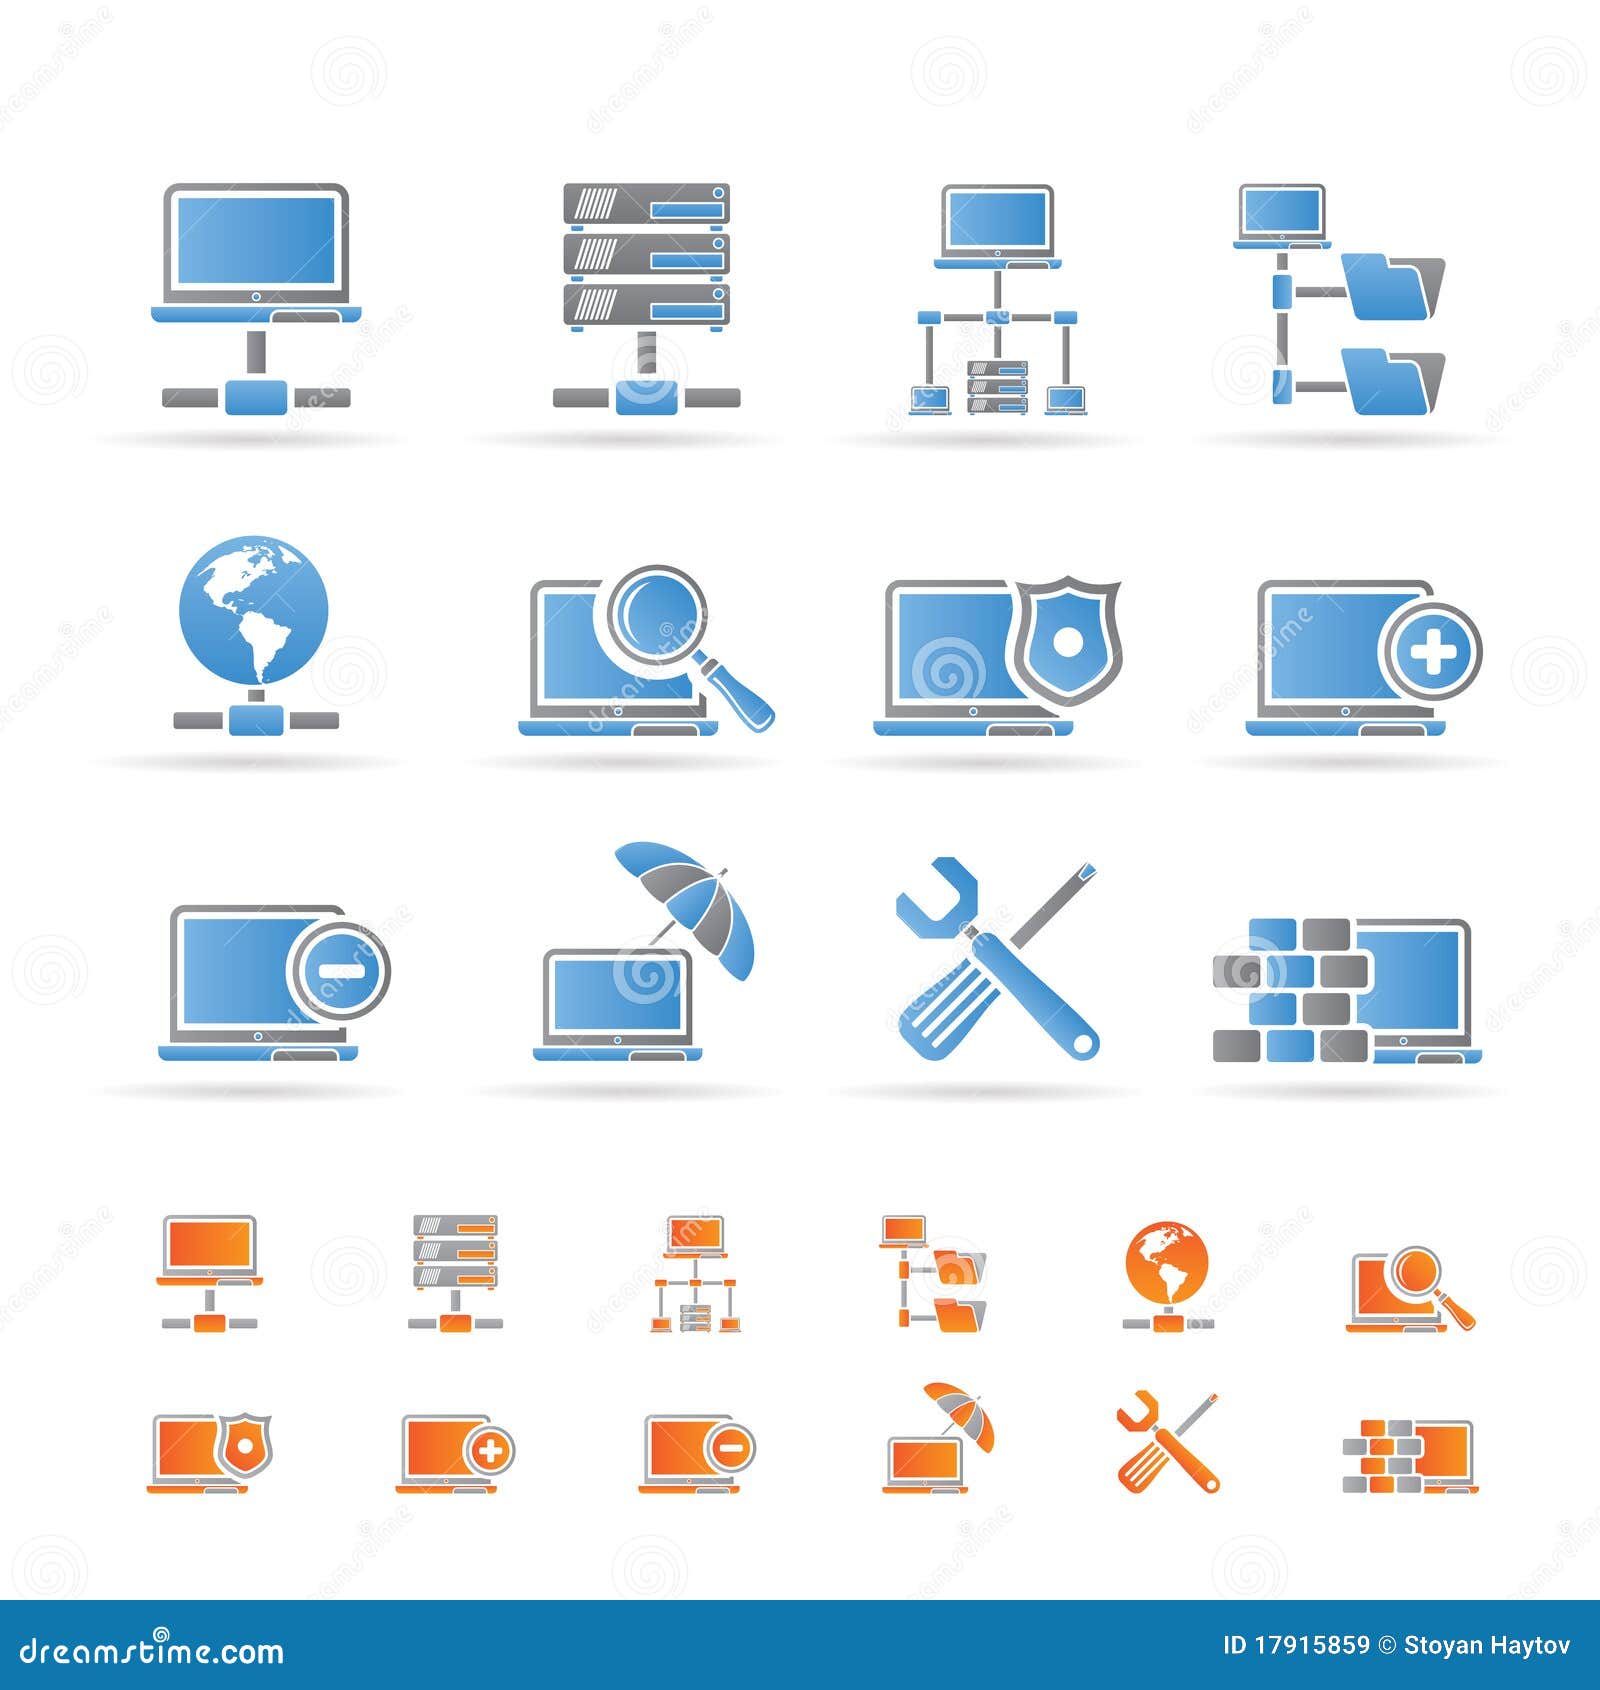 network clipart collection - photo #29